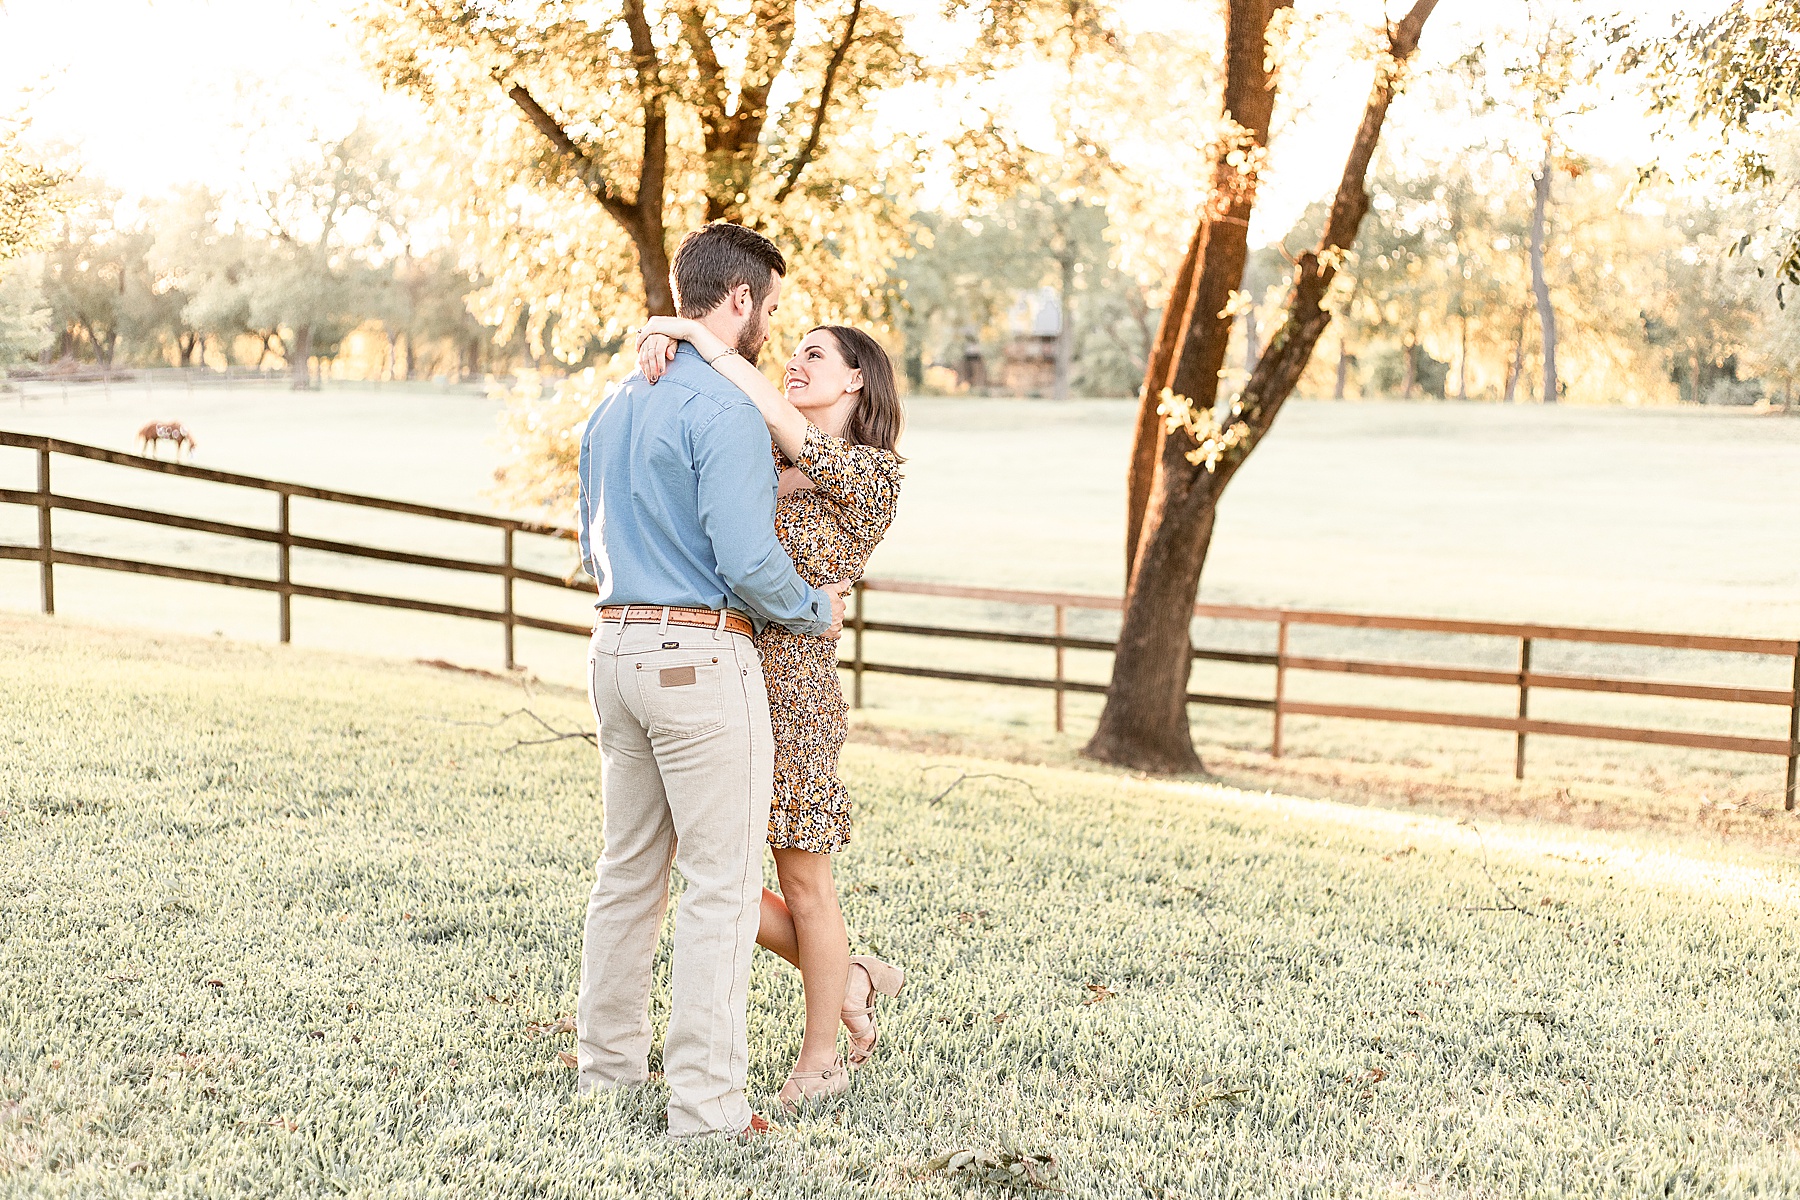 Willow Vogt Photography, Golden Hour, Anniversary Session, Couples Session, Waco Photographer, Texas Photographer